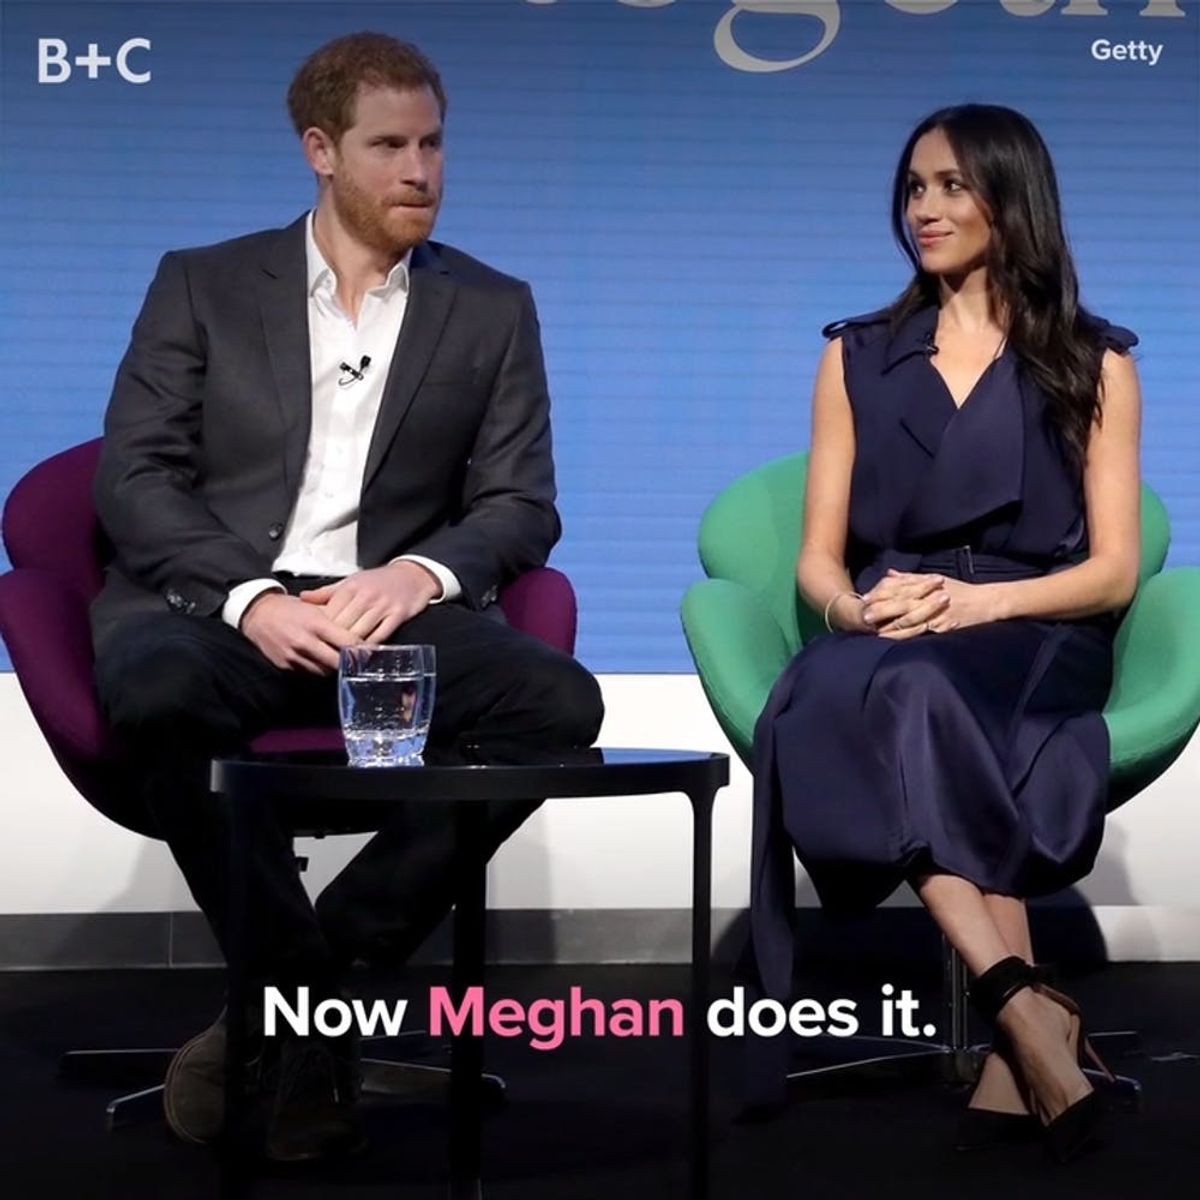 Meghan Markle Has *Officially* Mastered the “Duchess Slant”